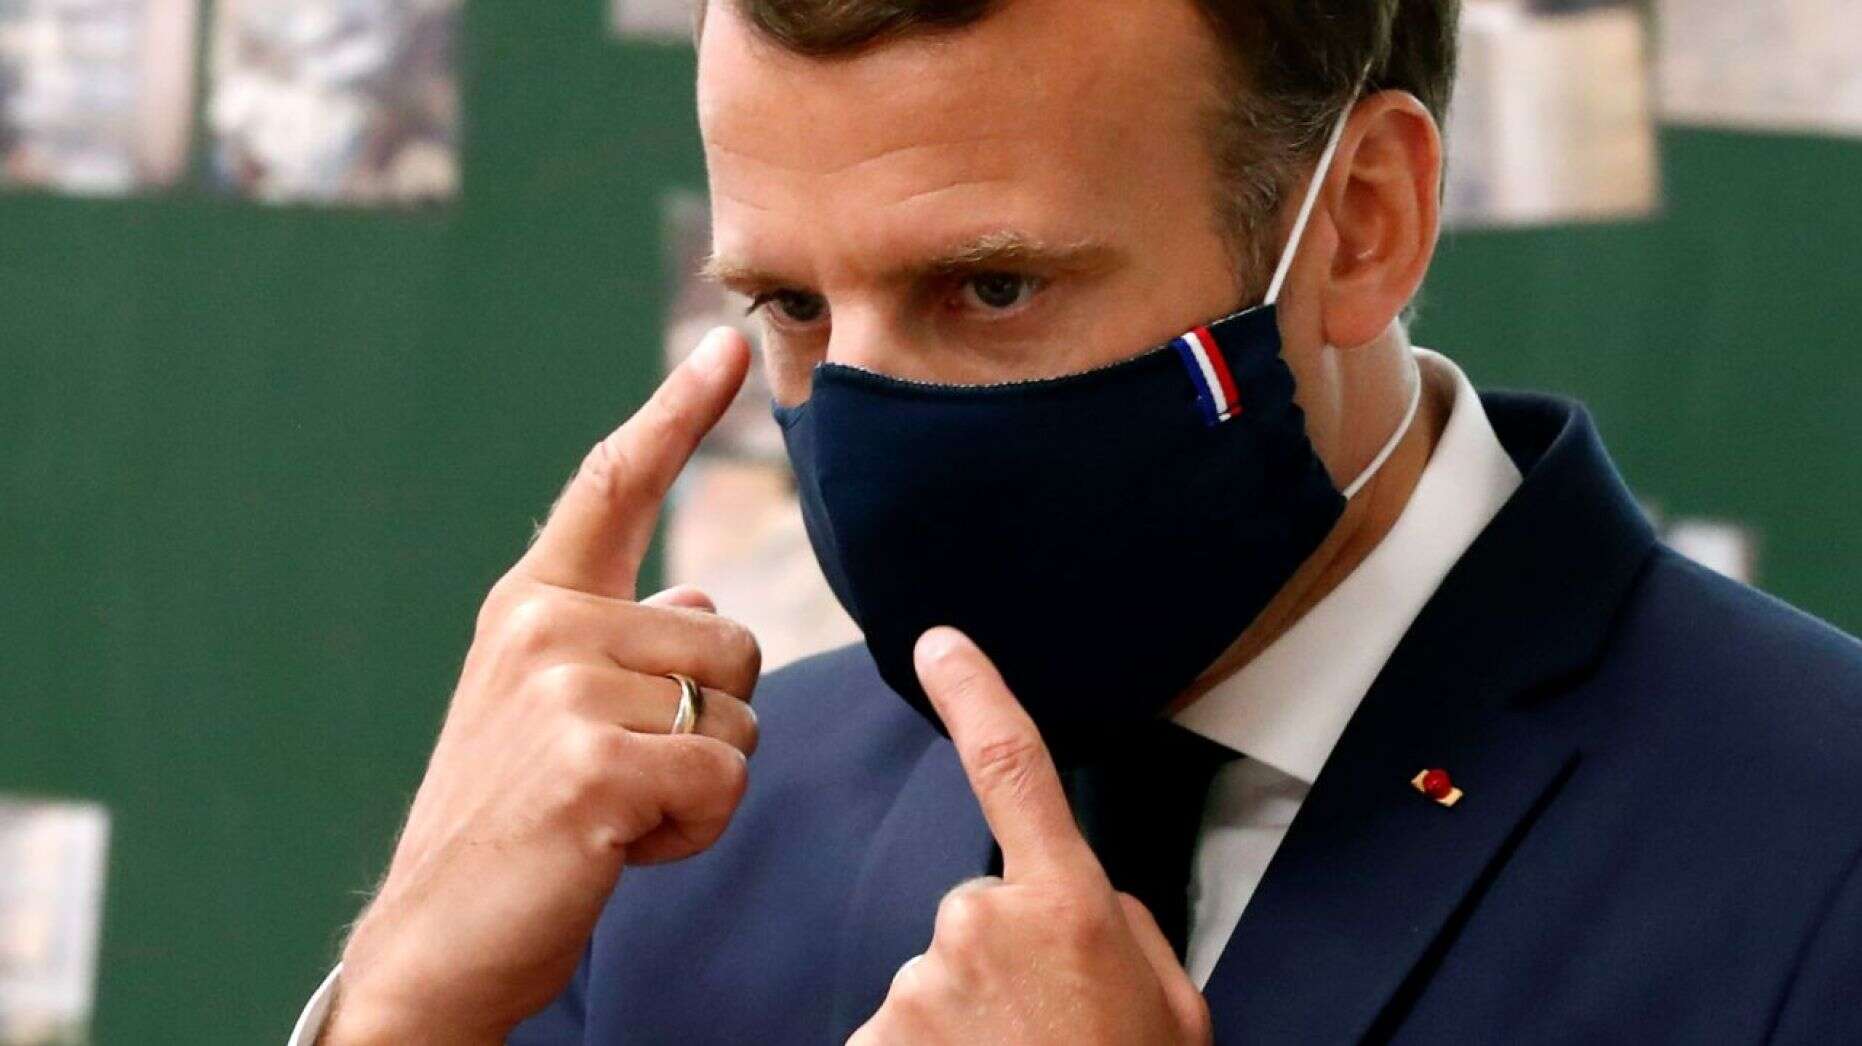 France Has Millions of Unsold Masks